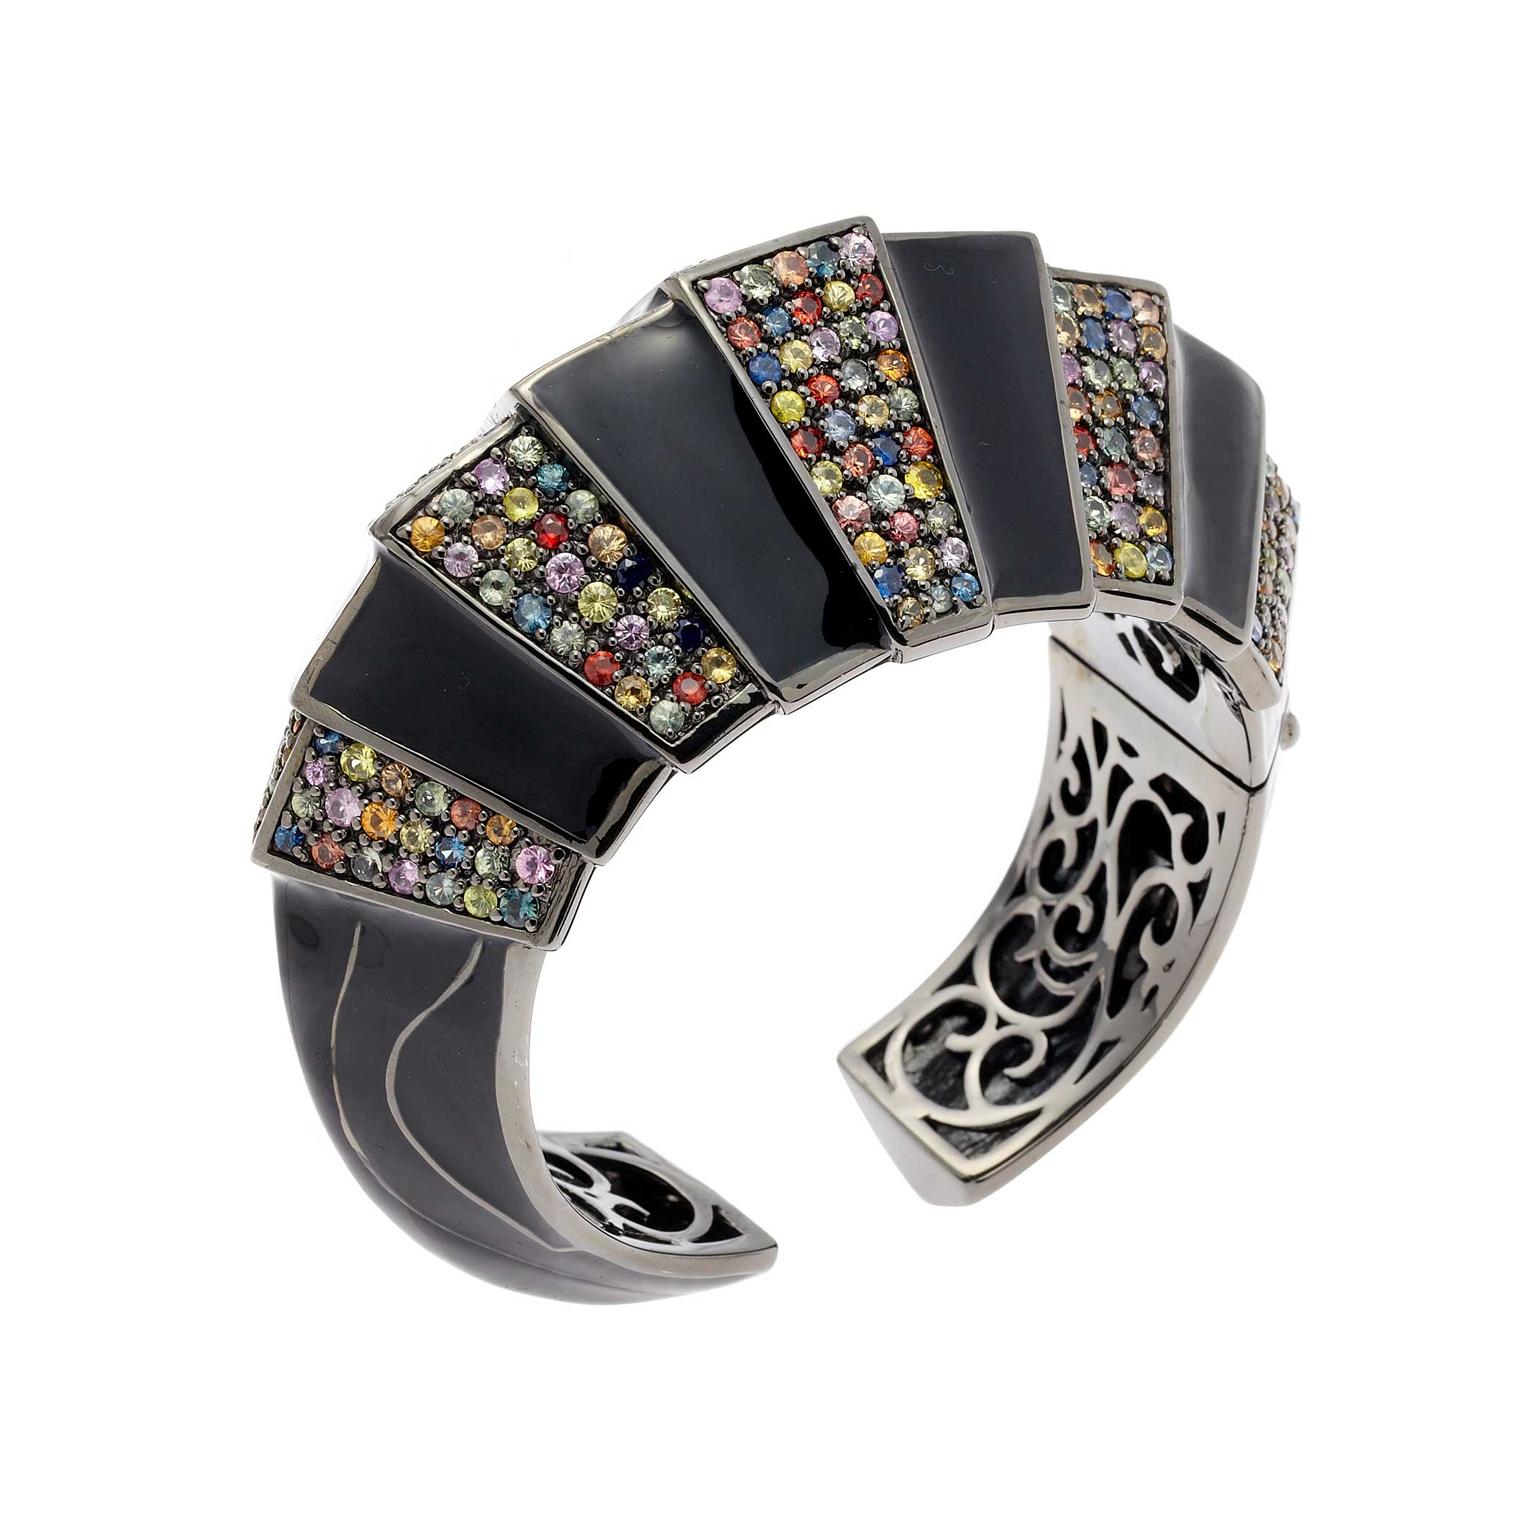 Matthew Campbell Laurenza Primordial silver cuff in black enamel, and sapphires in black rhodium